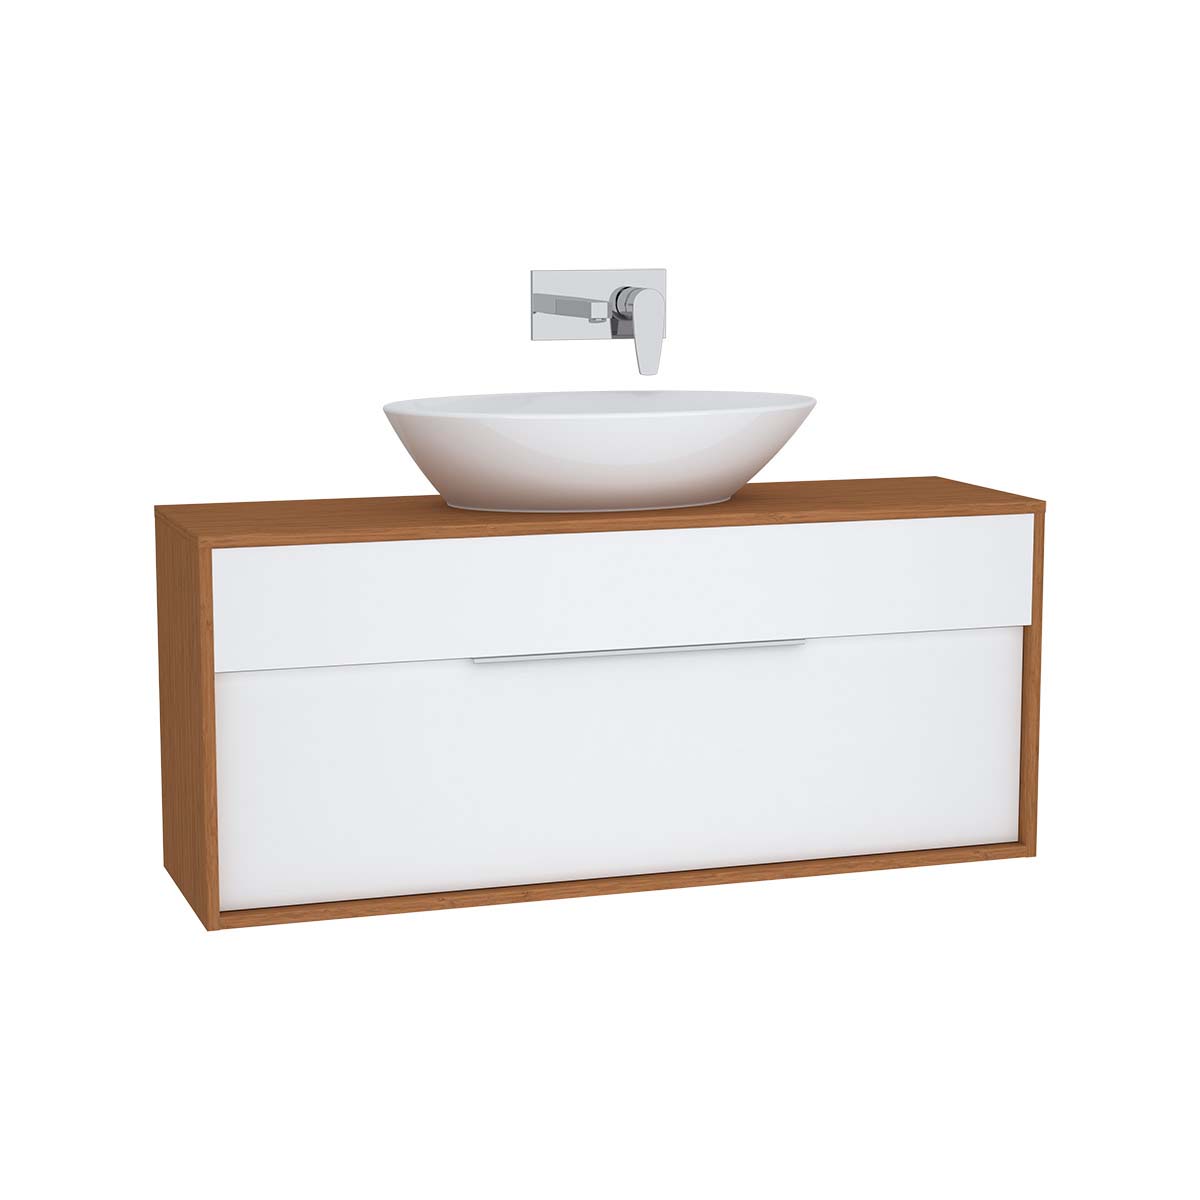 Integra Washbasin Unit, 120 cm, with 1 drawer, for countertop basins, with 34 cm depth, White High Gloss & Bamboo